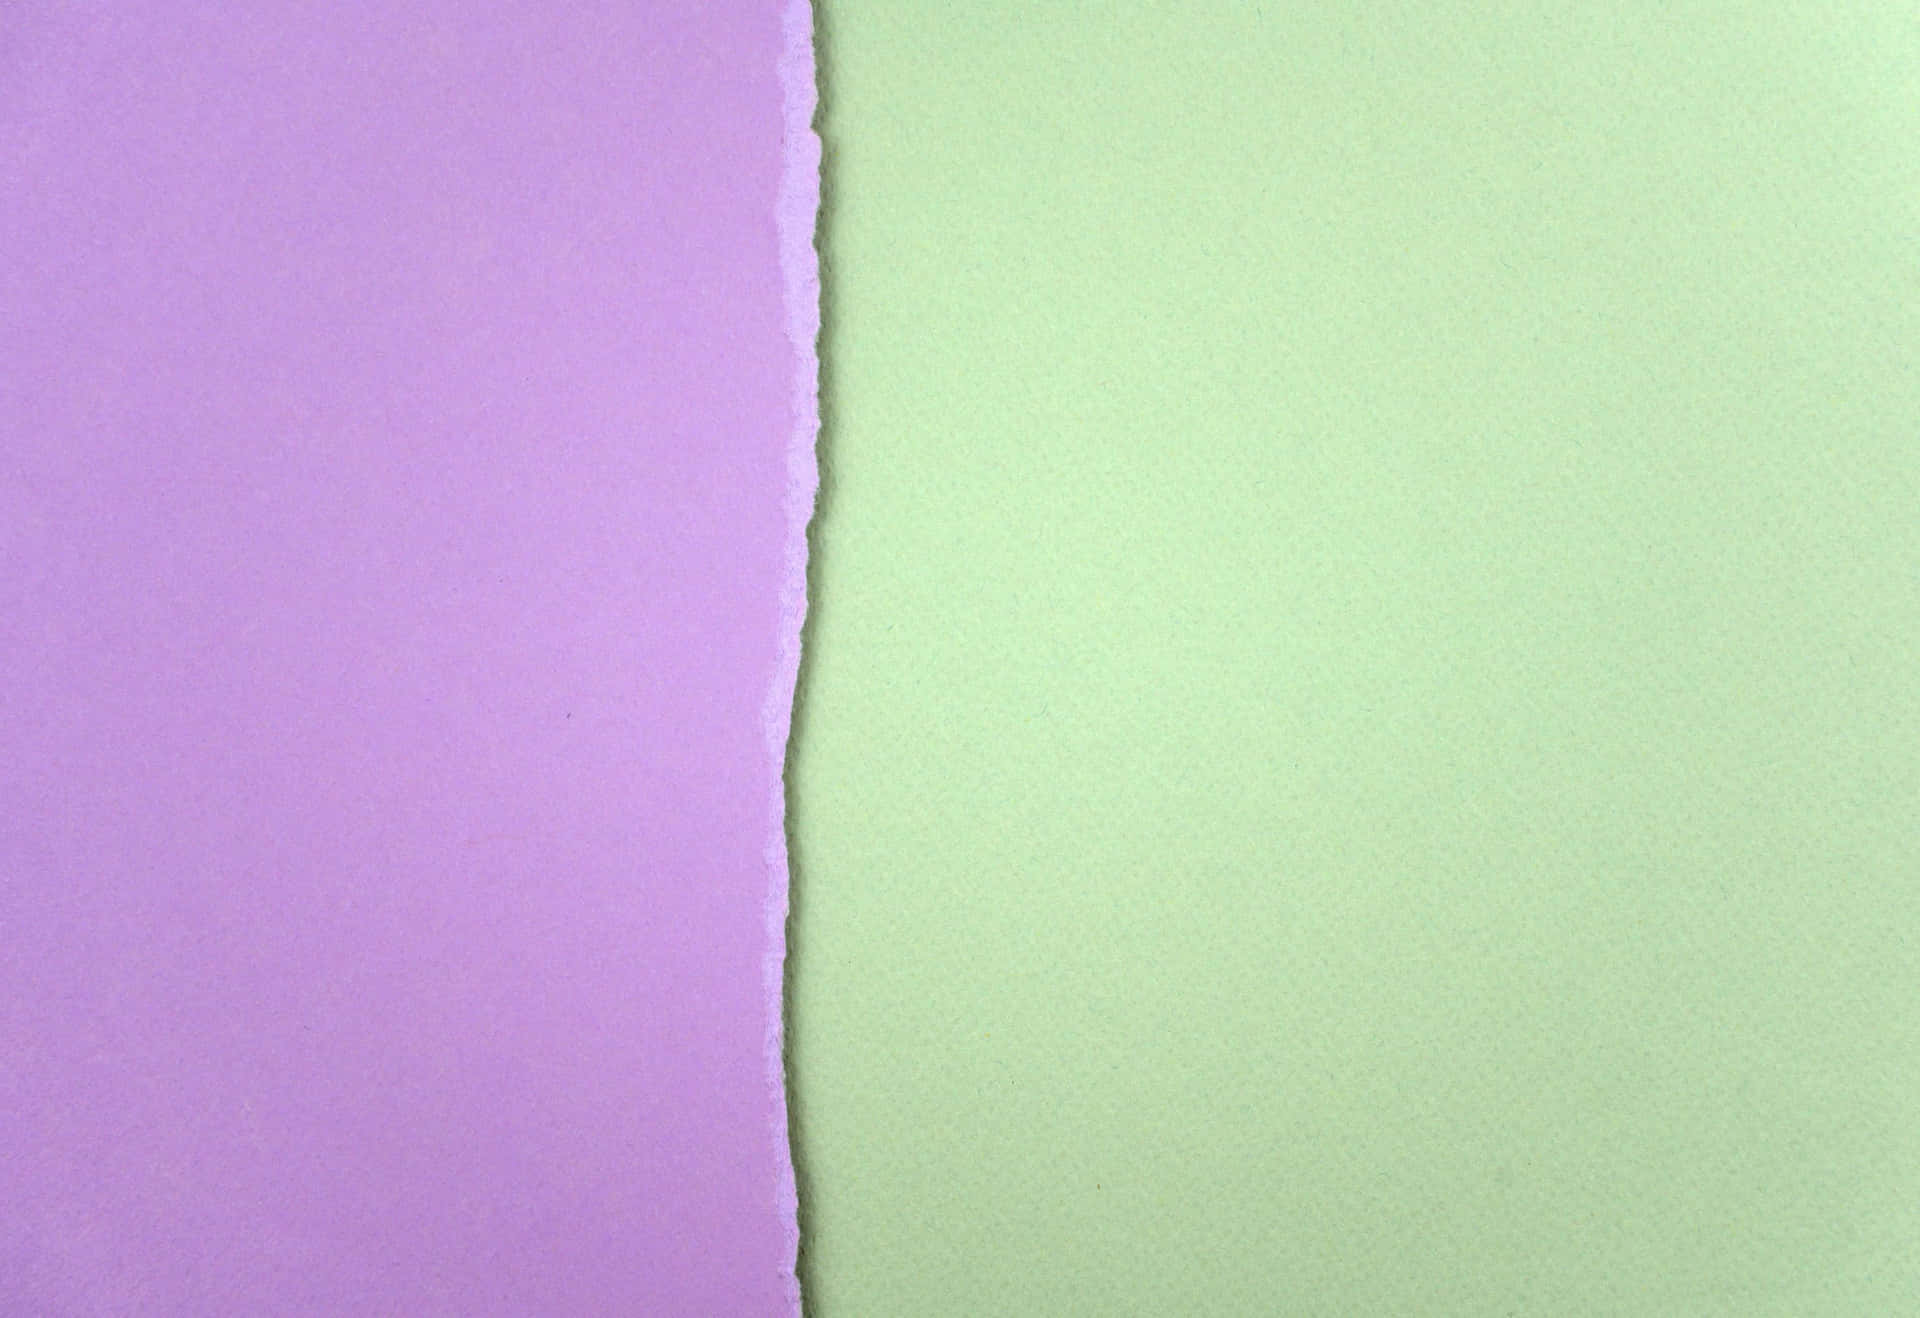 A Piece Of Paper With A Green And Purple Color